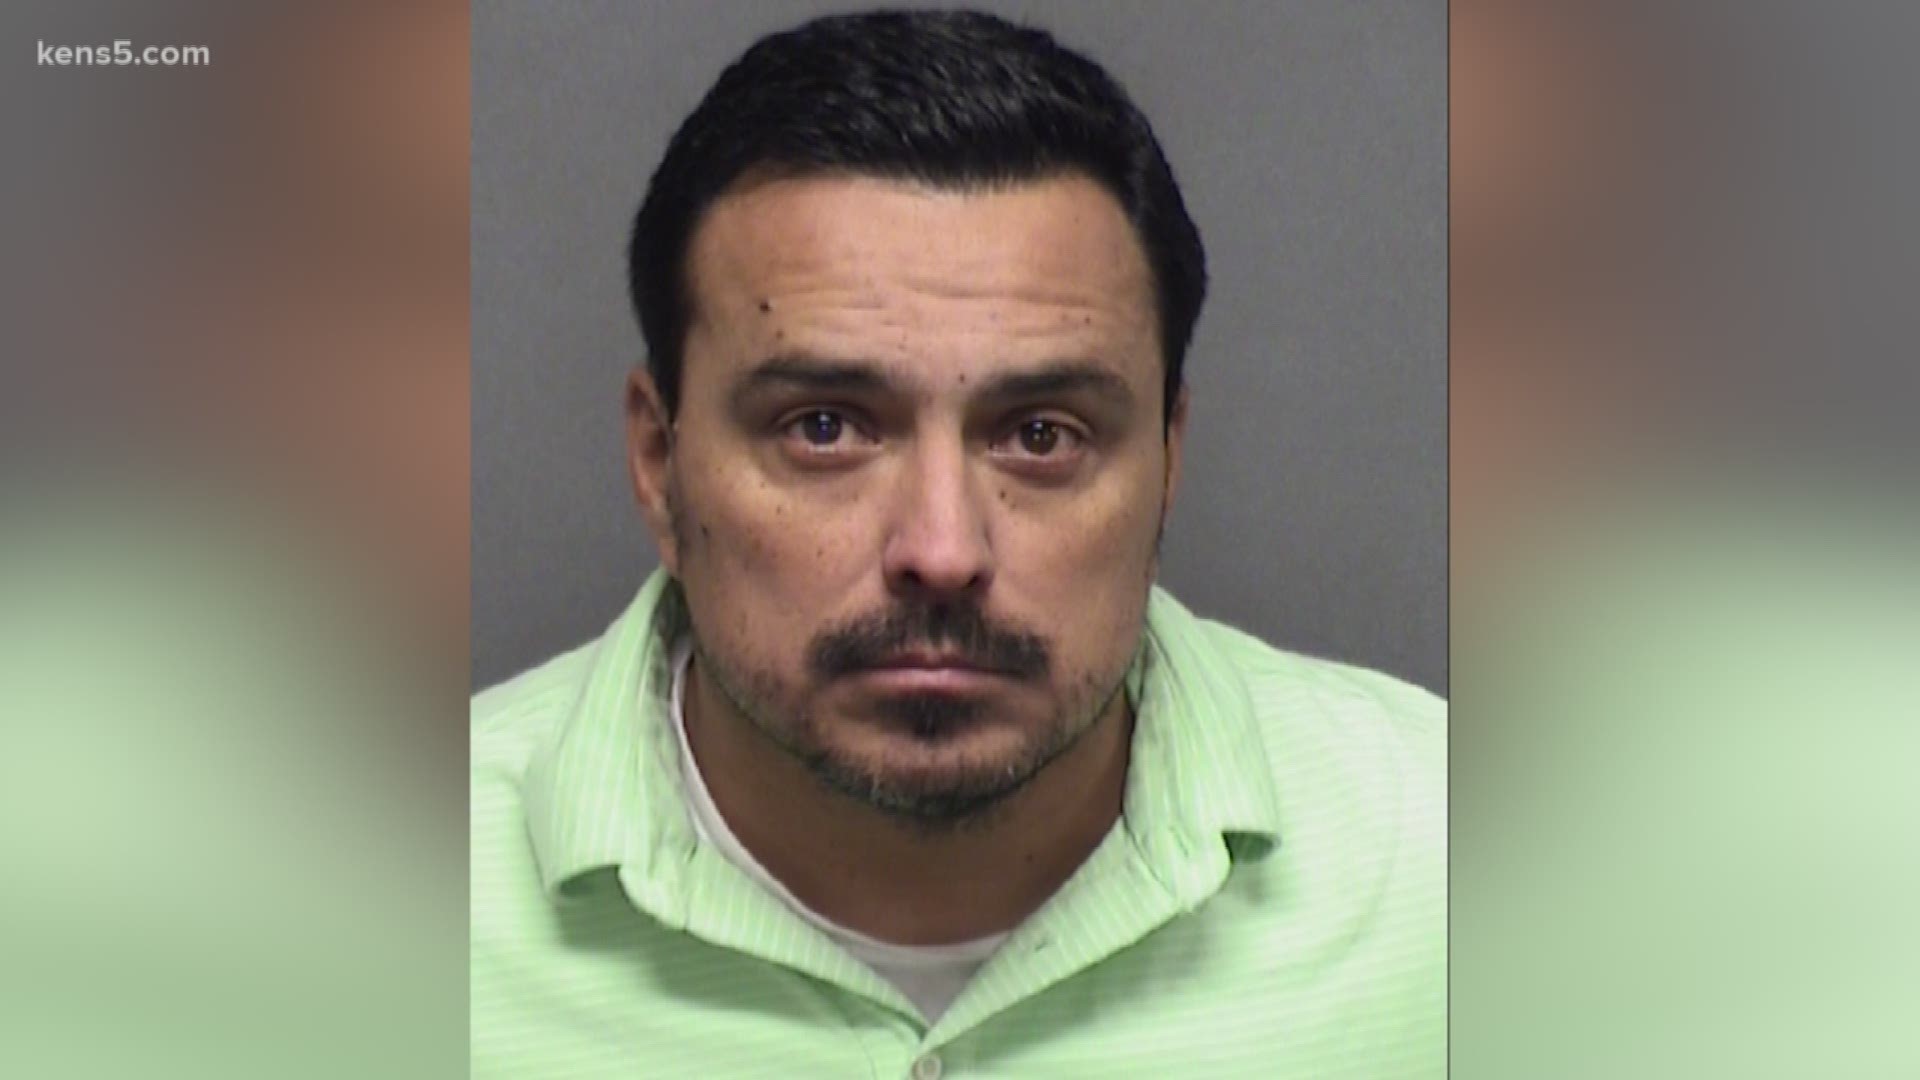 Teacher arrested at Hondo ISD middle school, accused of having sex with  student | kens5.com